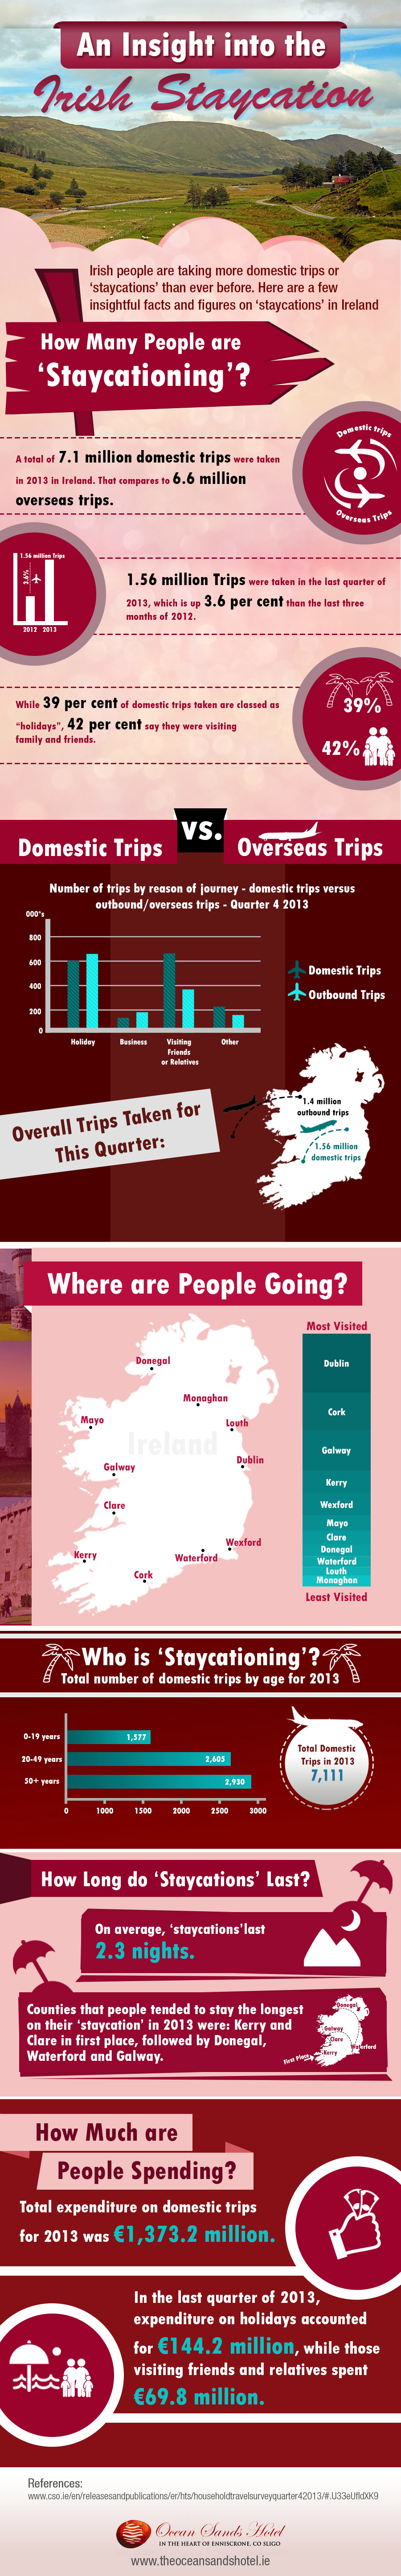 An Insight Into the Irish Staycation